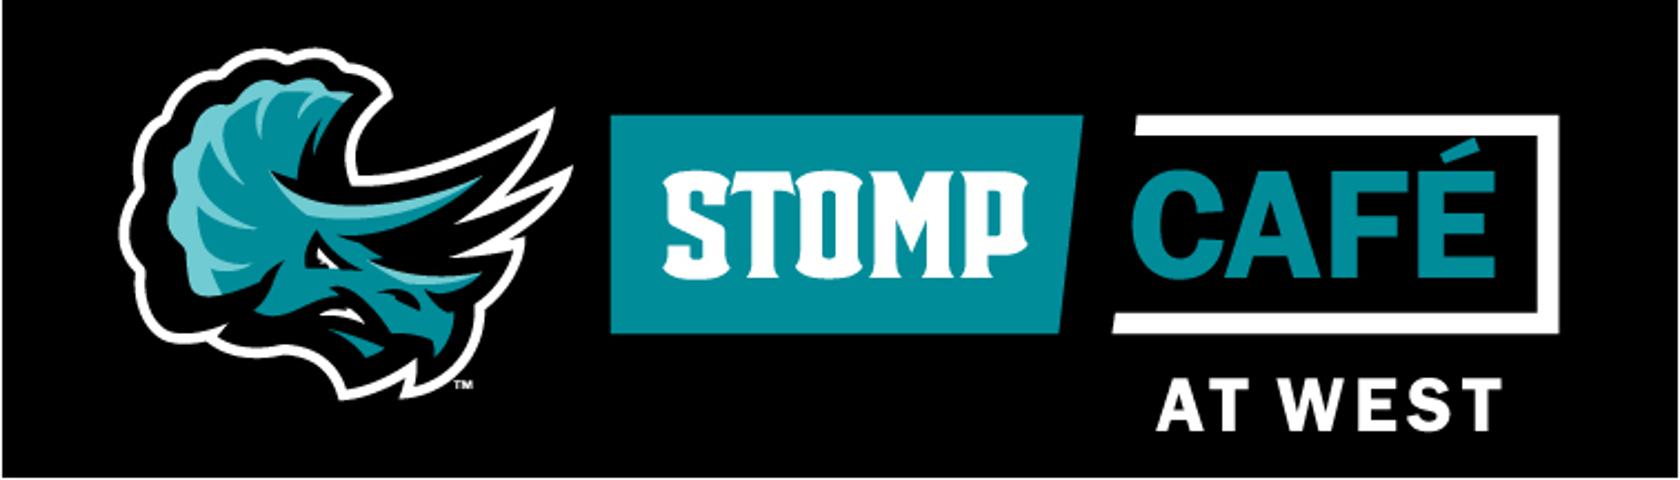 Stomp Cafe at West